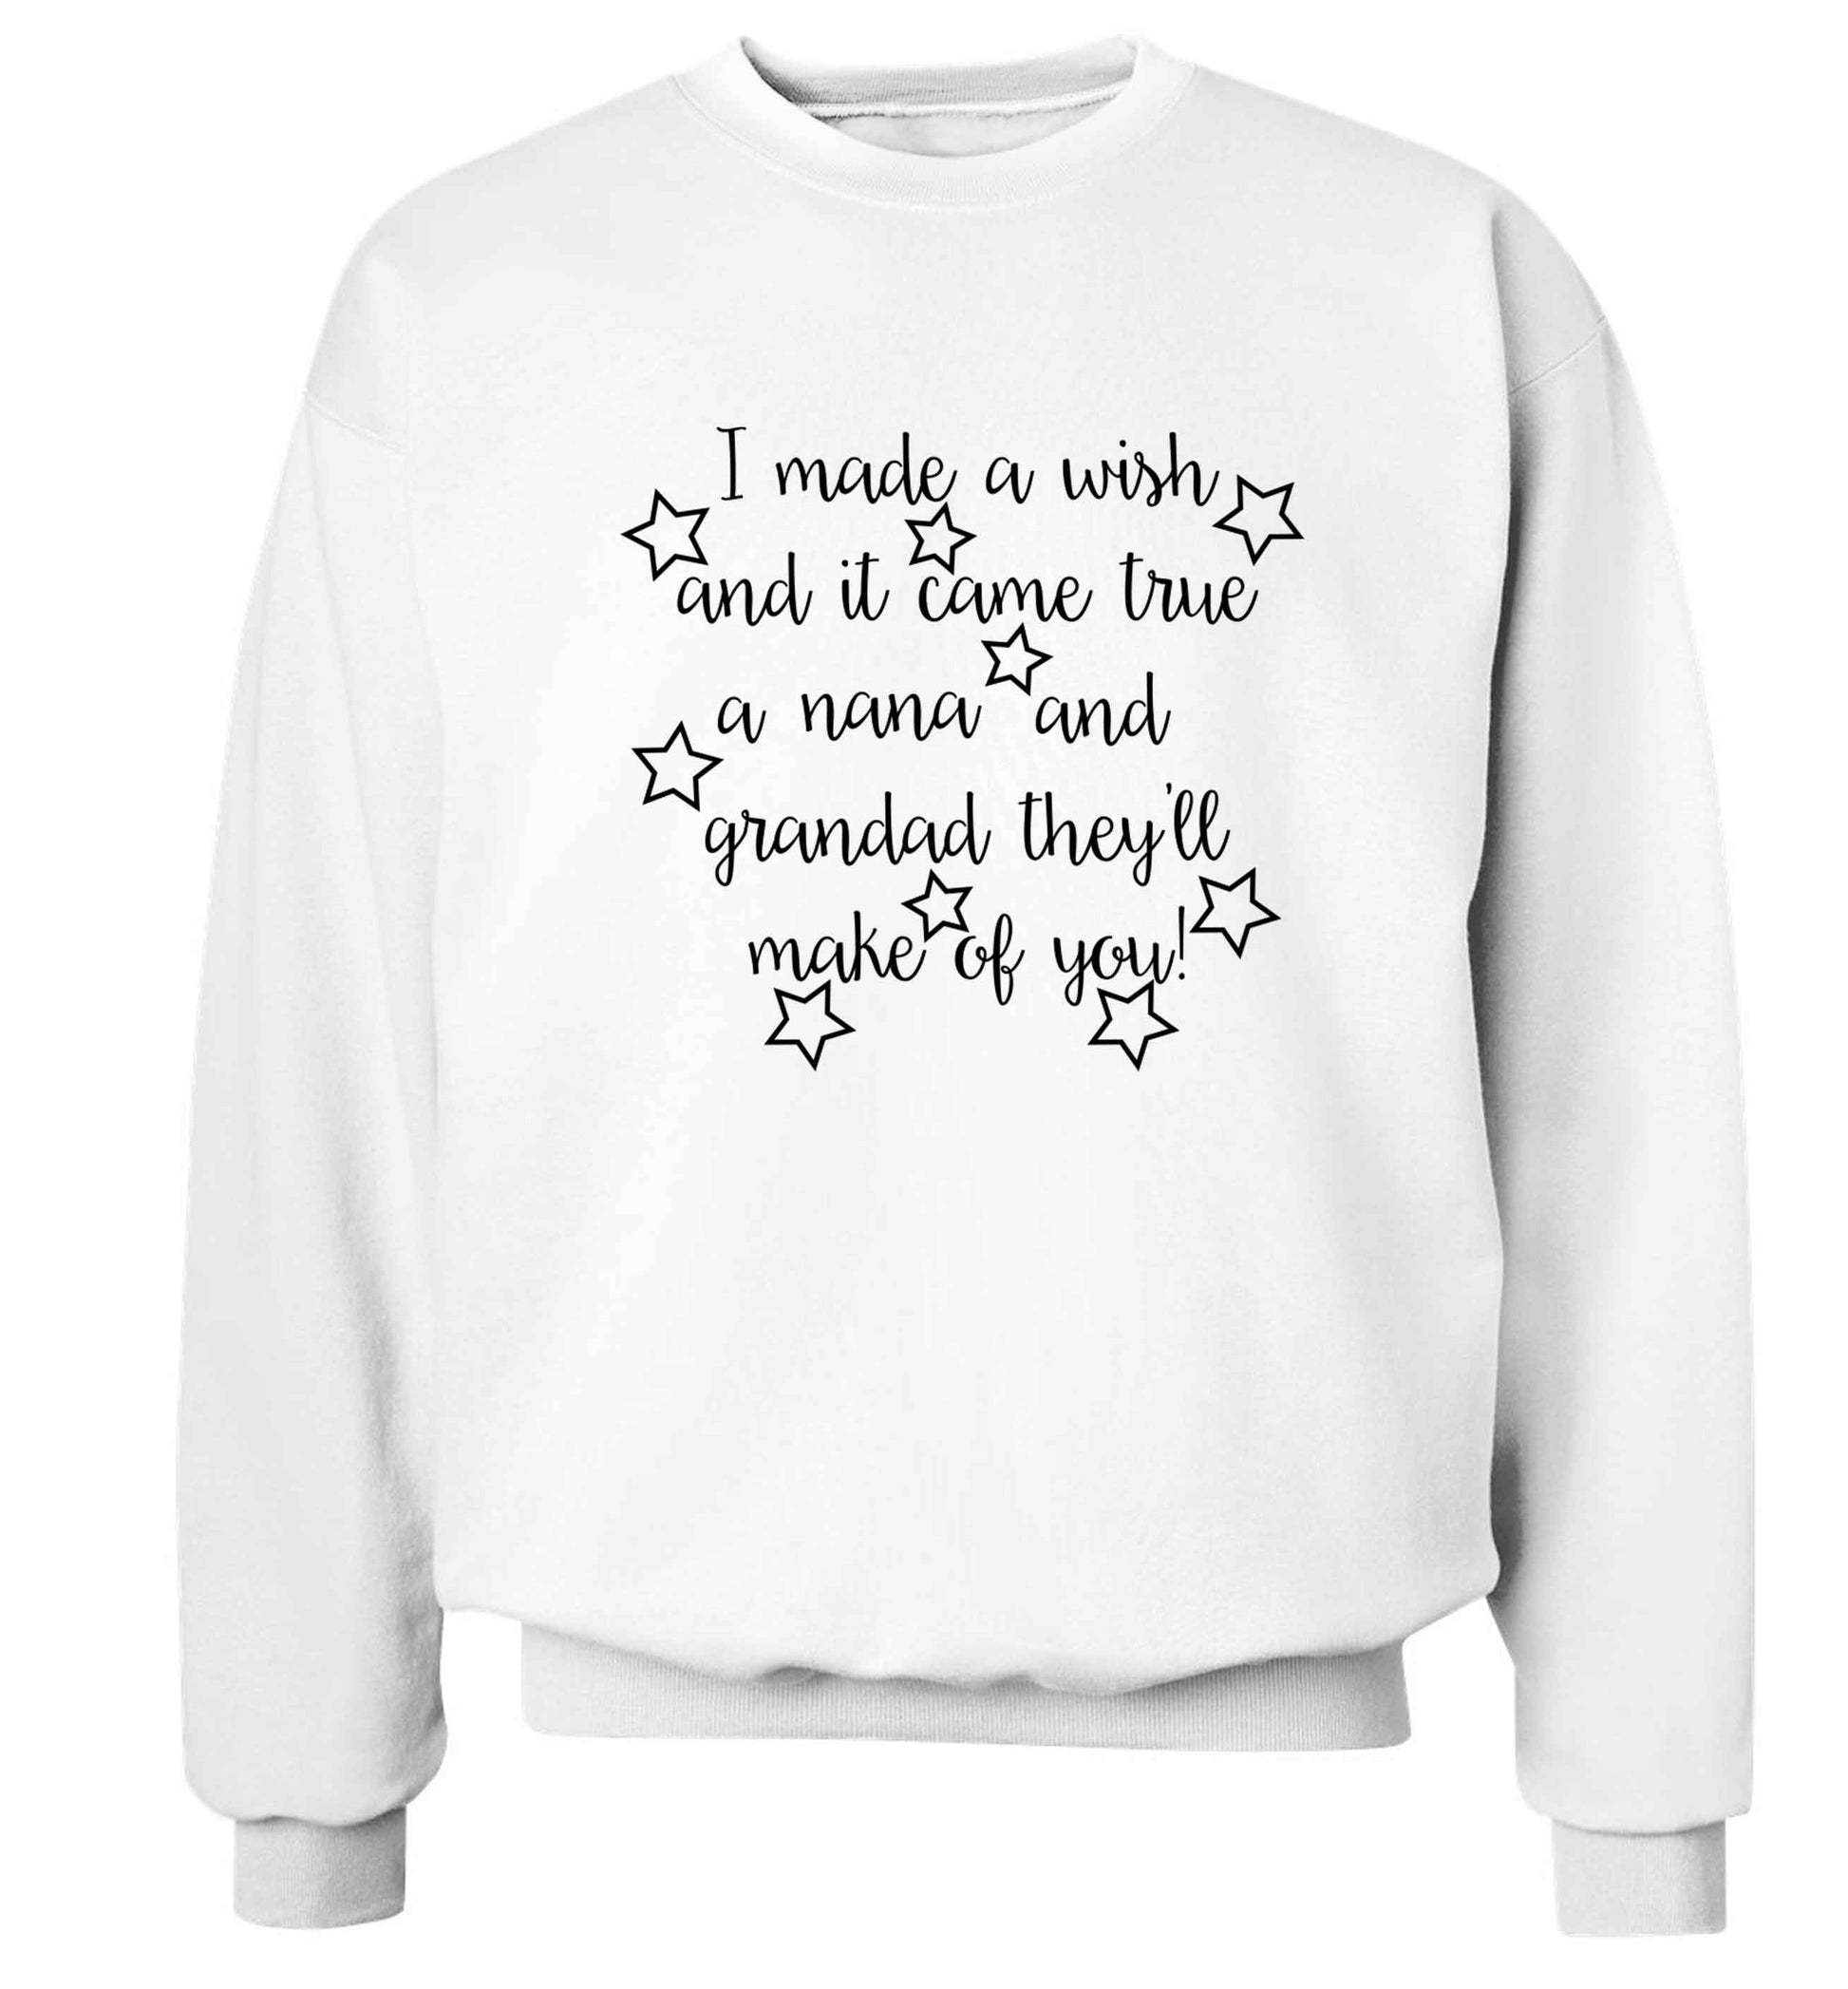 I made a wish and it came true a nana and grandad they'll make of you! Adult's unisex white Sweater 2XL